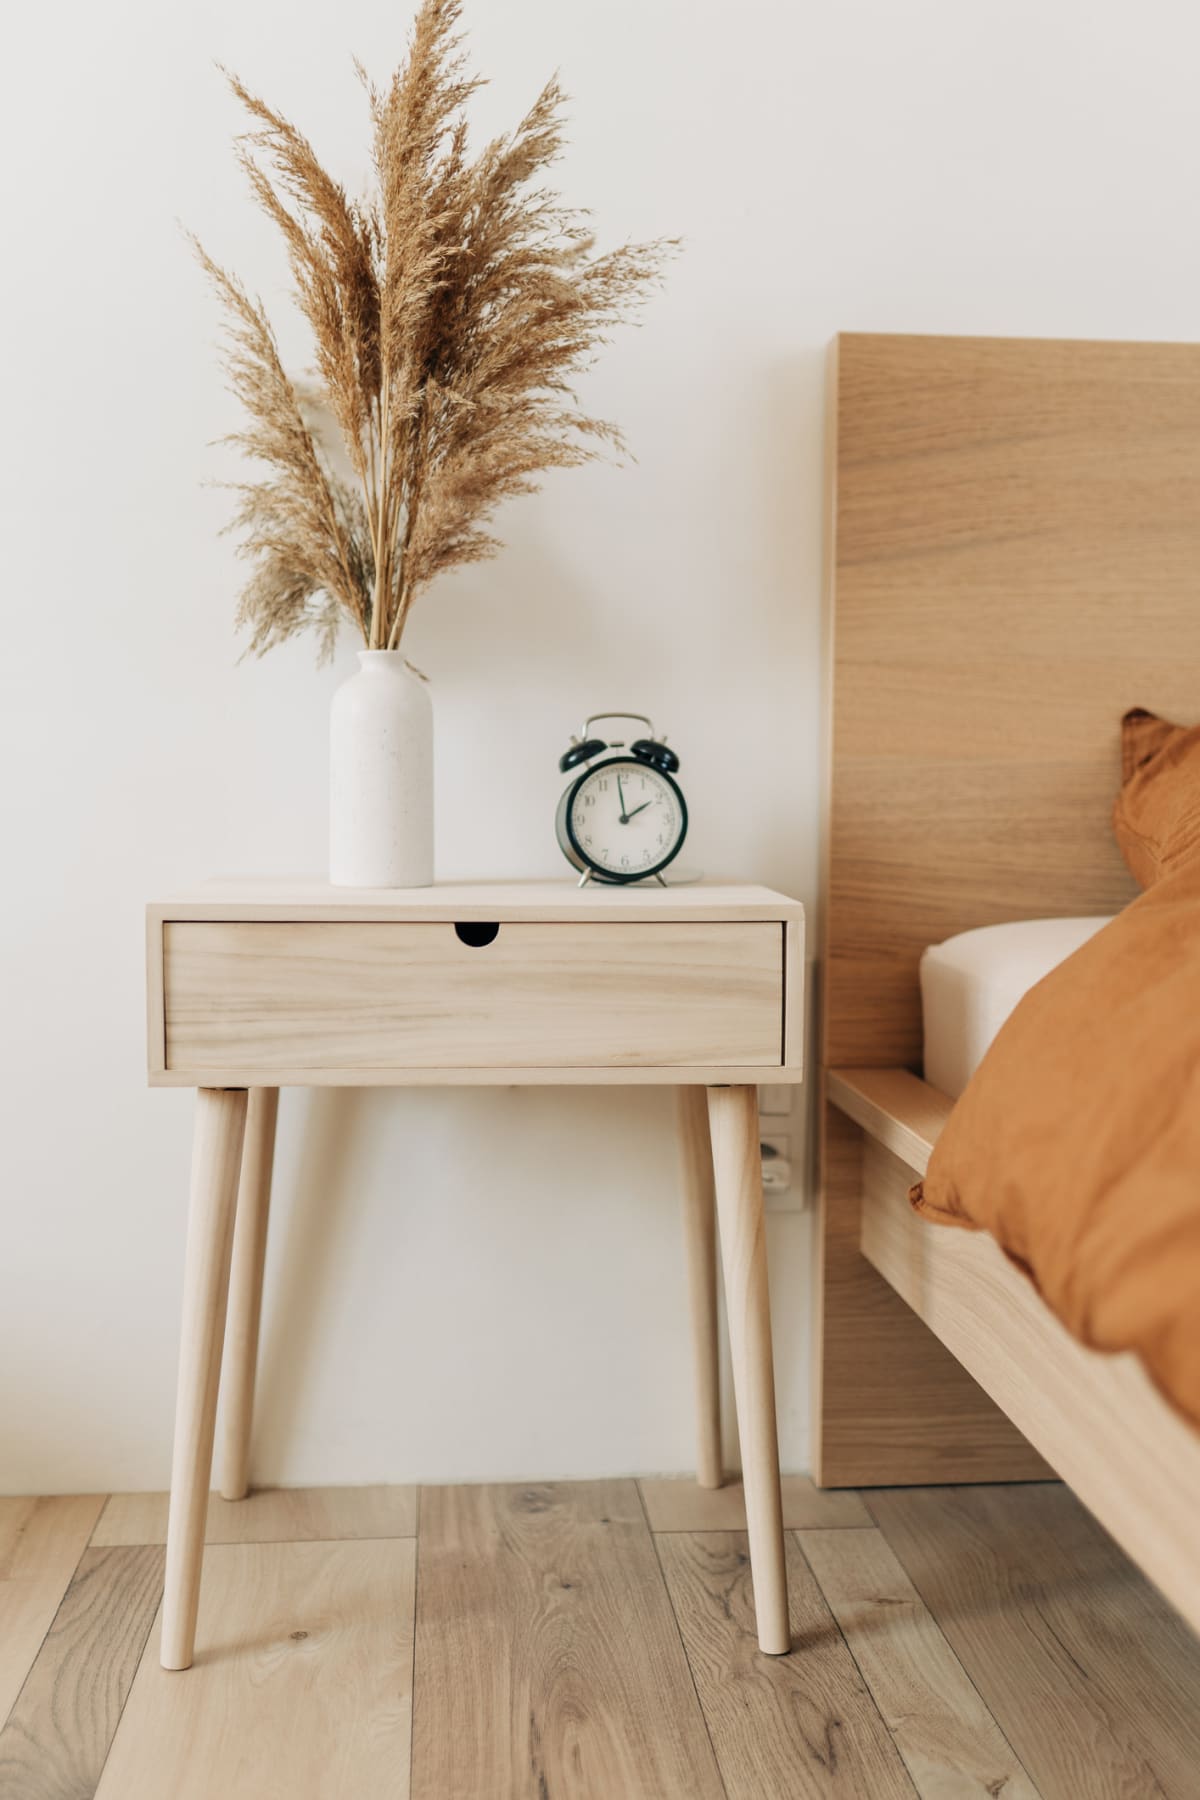 Bedside table with ficus plant and clock